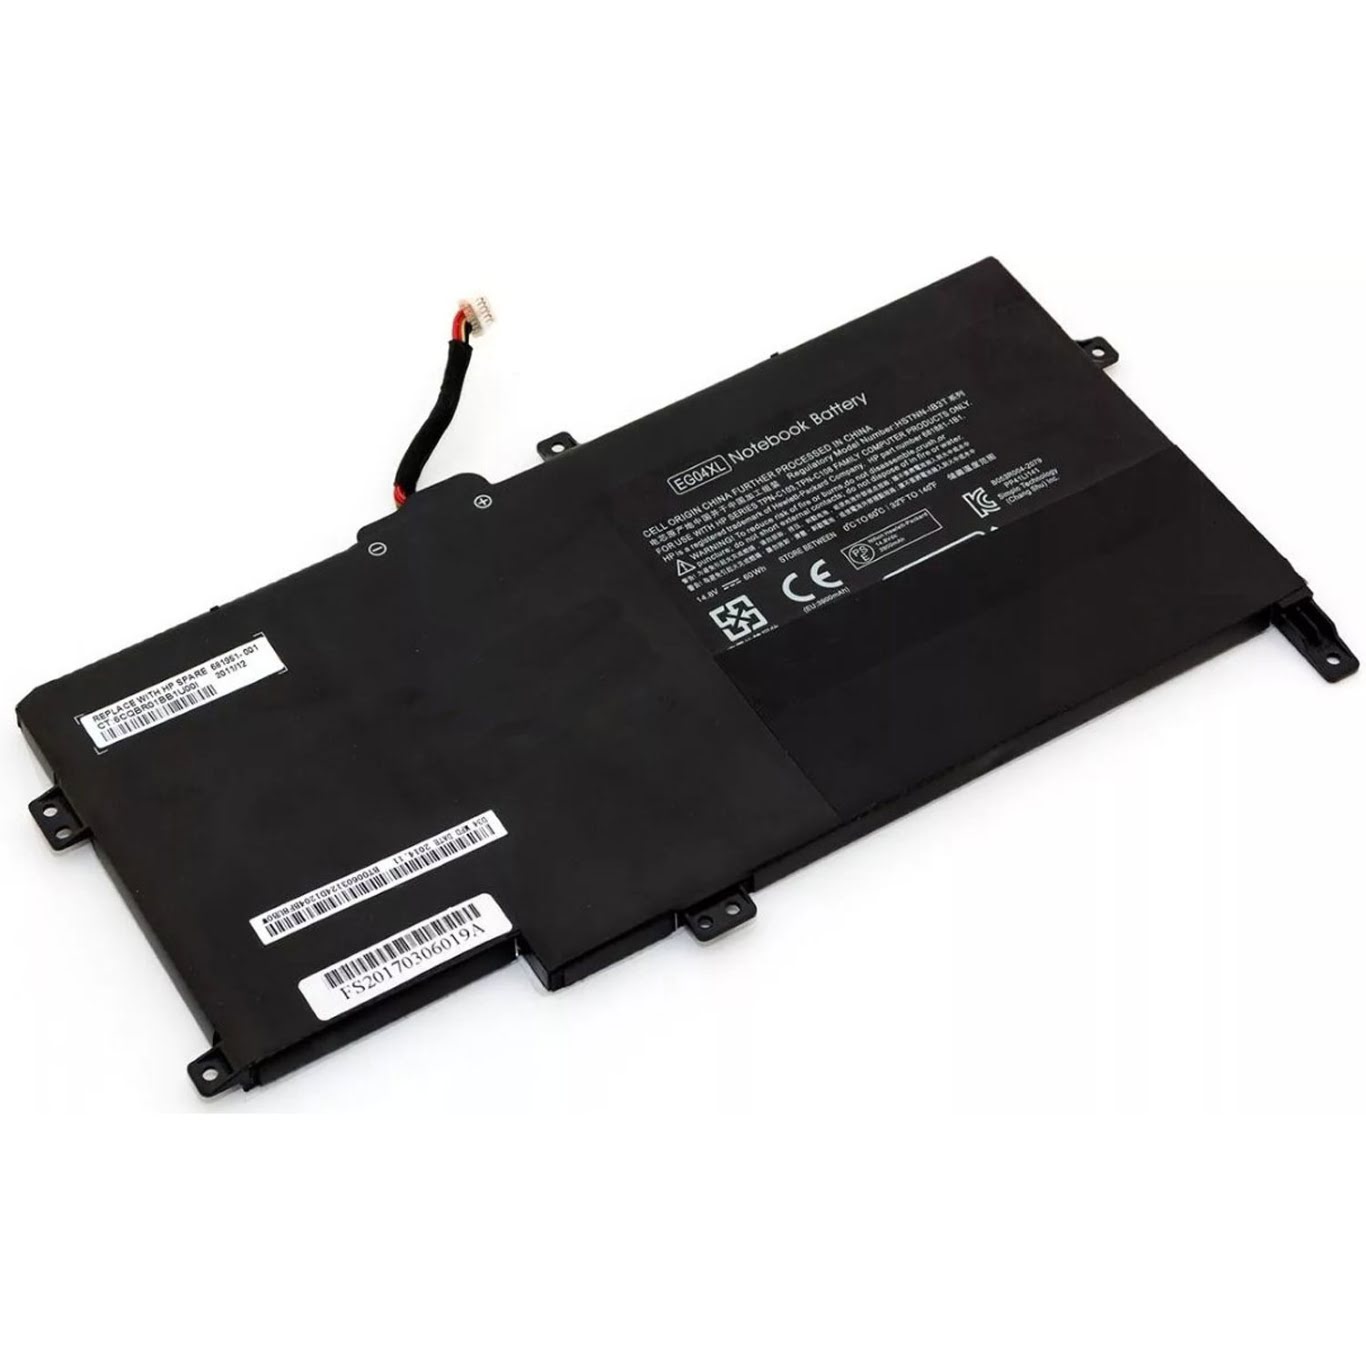 681881-171, 681881-271 replacement Laptop Battery for HP Envy 6 Series, Envy 6-1000, 60wh, 8 cells, 14.8V